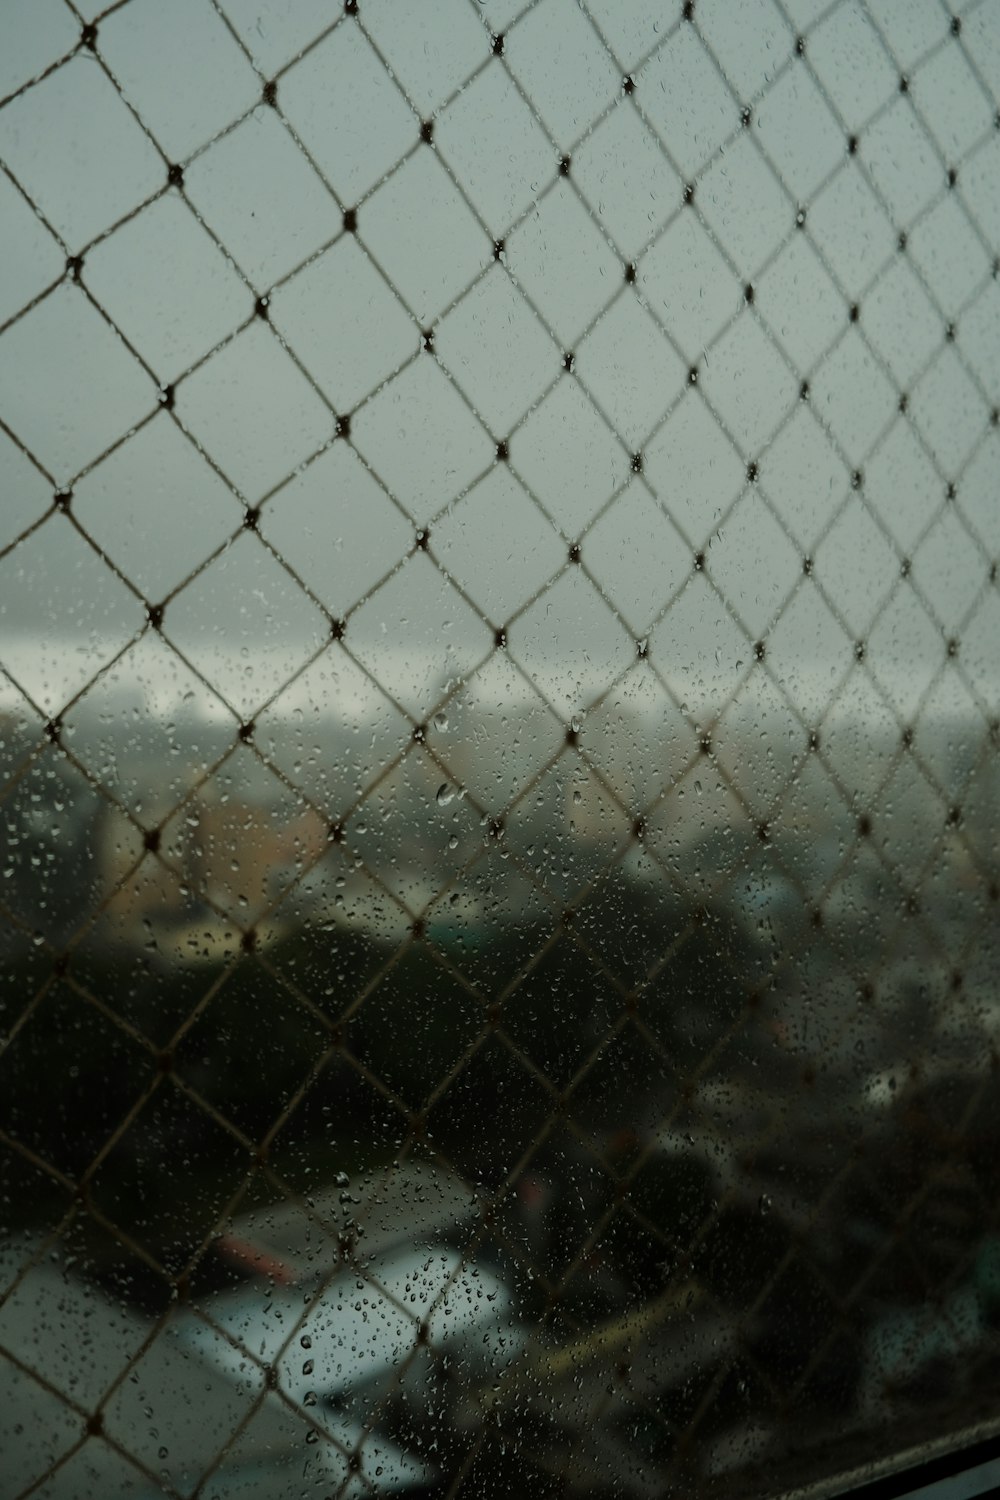 a view of a city through a chain link fence